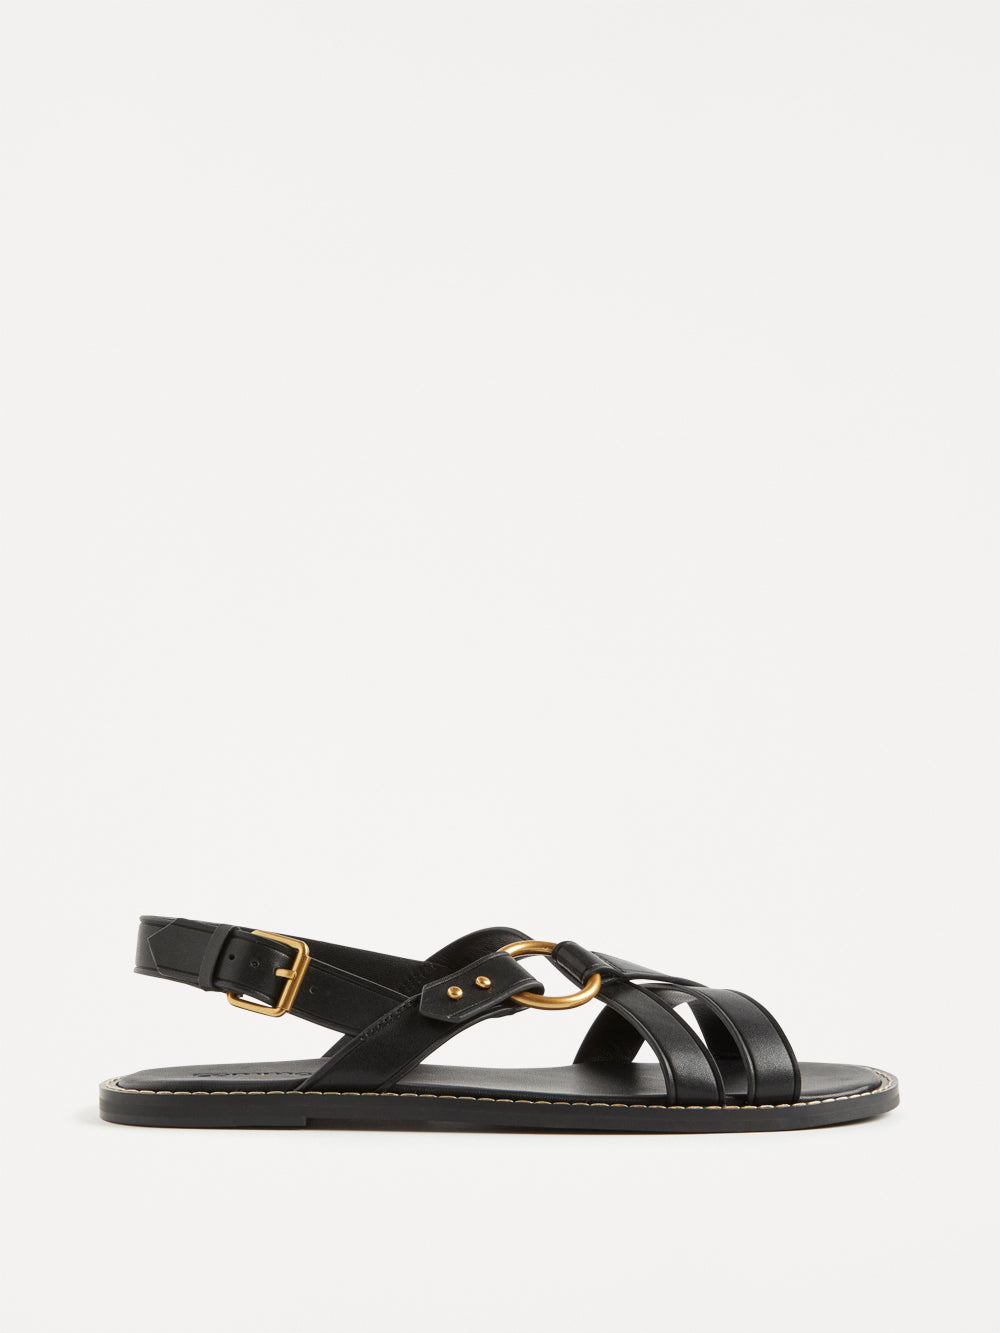 The Tamsin Leather Sandal